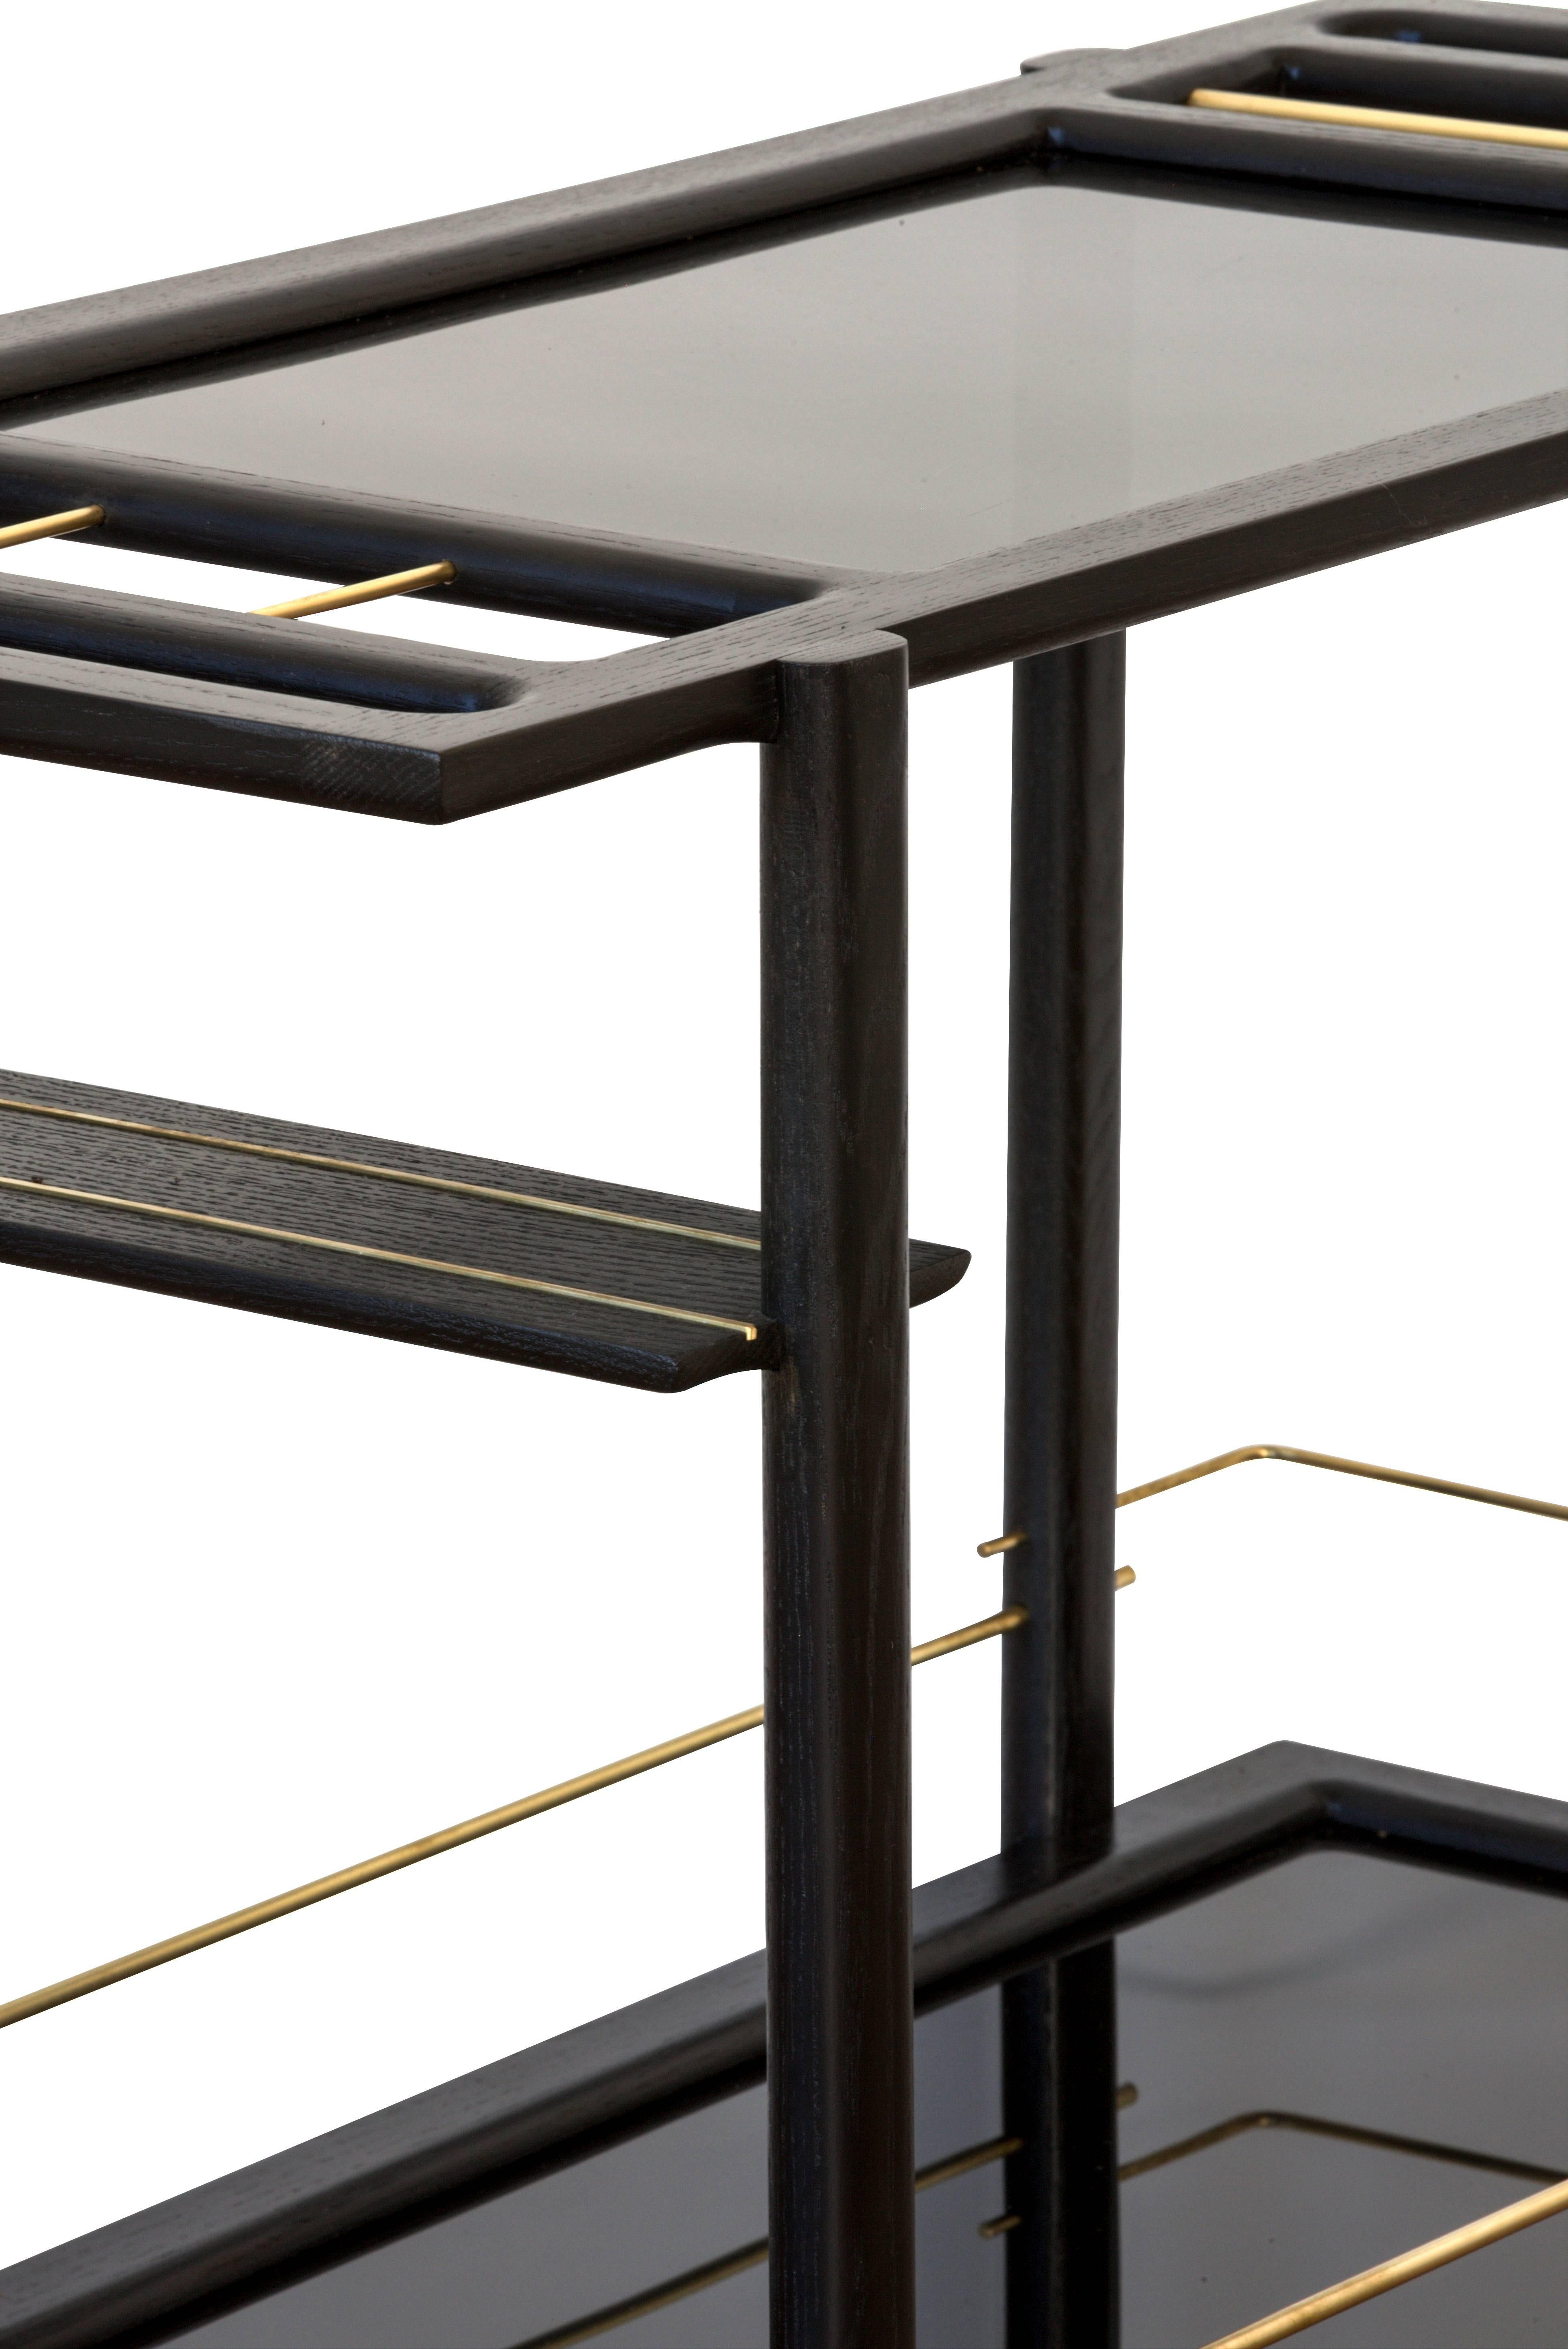 Solid wood constructed barcart with hand-cut joinery, tempered glass panels, and fine metal accents. Handmade in Los Angeles, California. 

Shown in ebonized oak, brass with smoked glass. 

Please inquire for custom wood, metal and glass